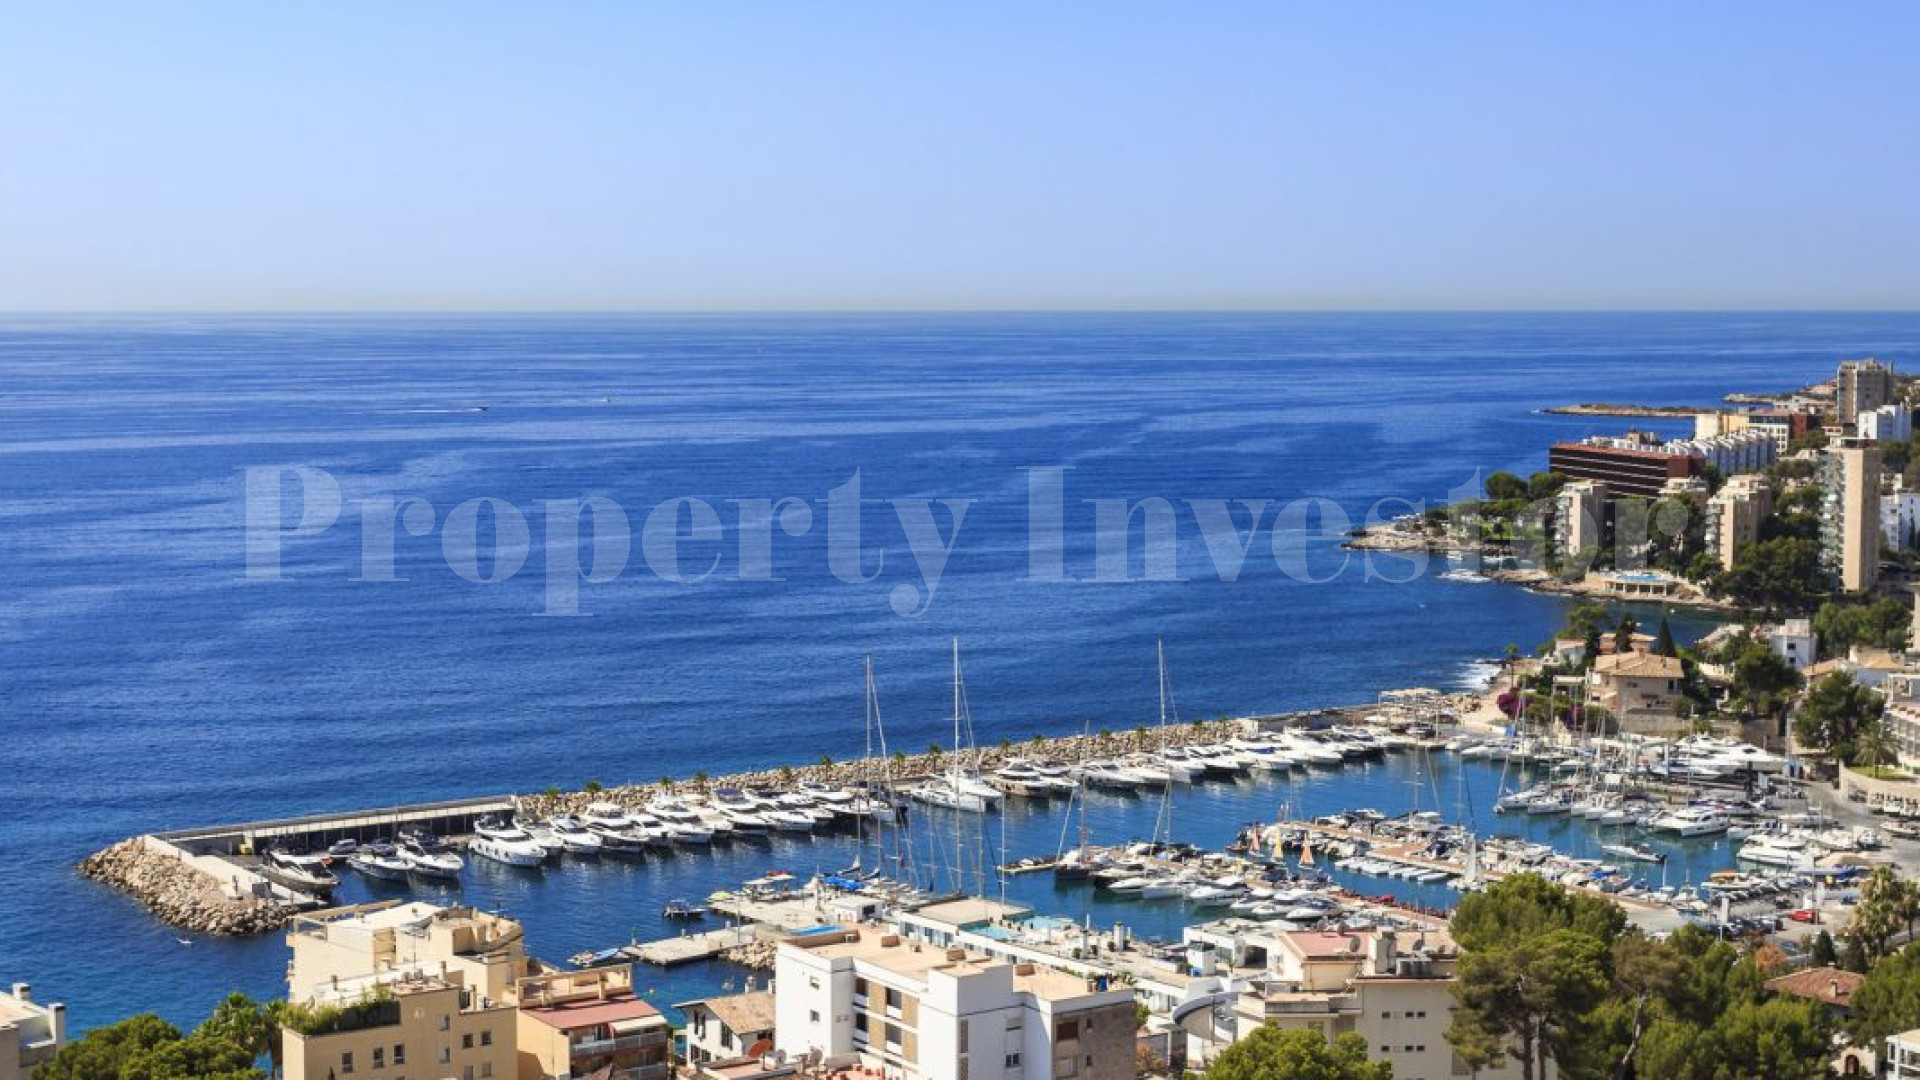 4 Bedroom High End Apartment with Panoramic Sea Views in San Augustin, Mallorca